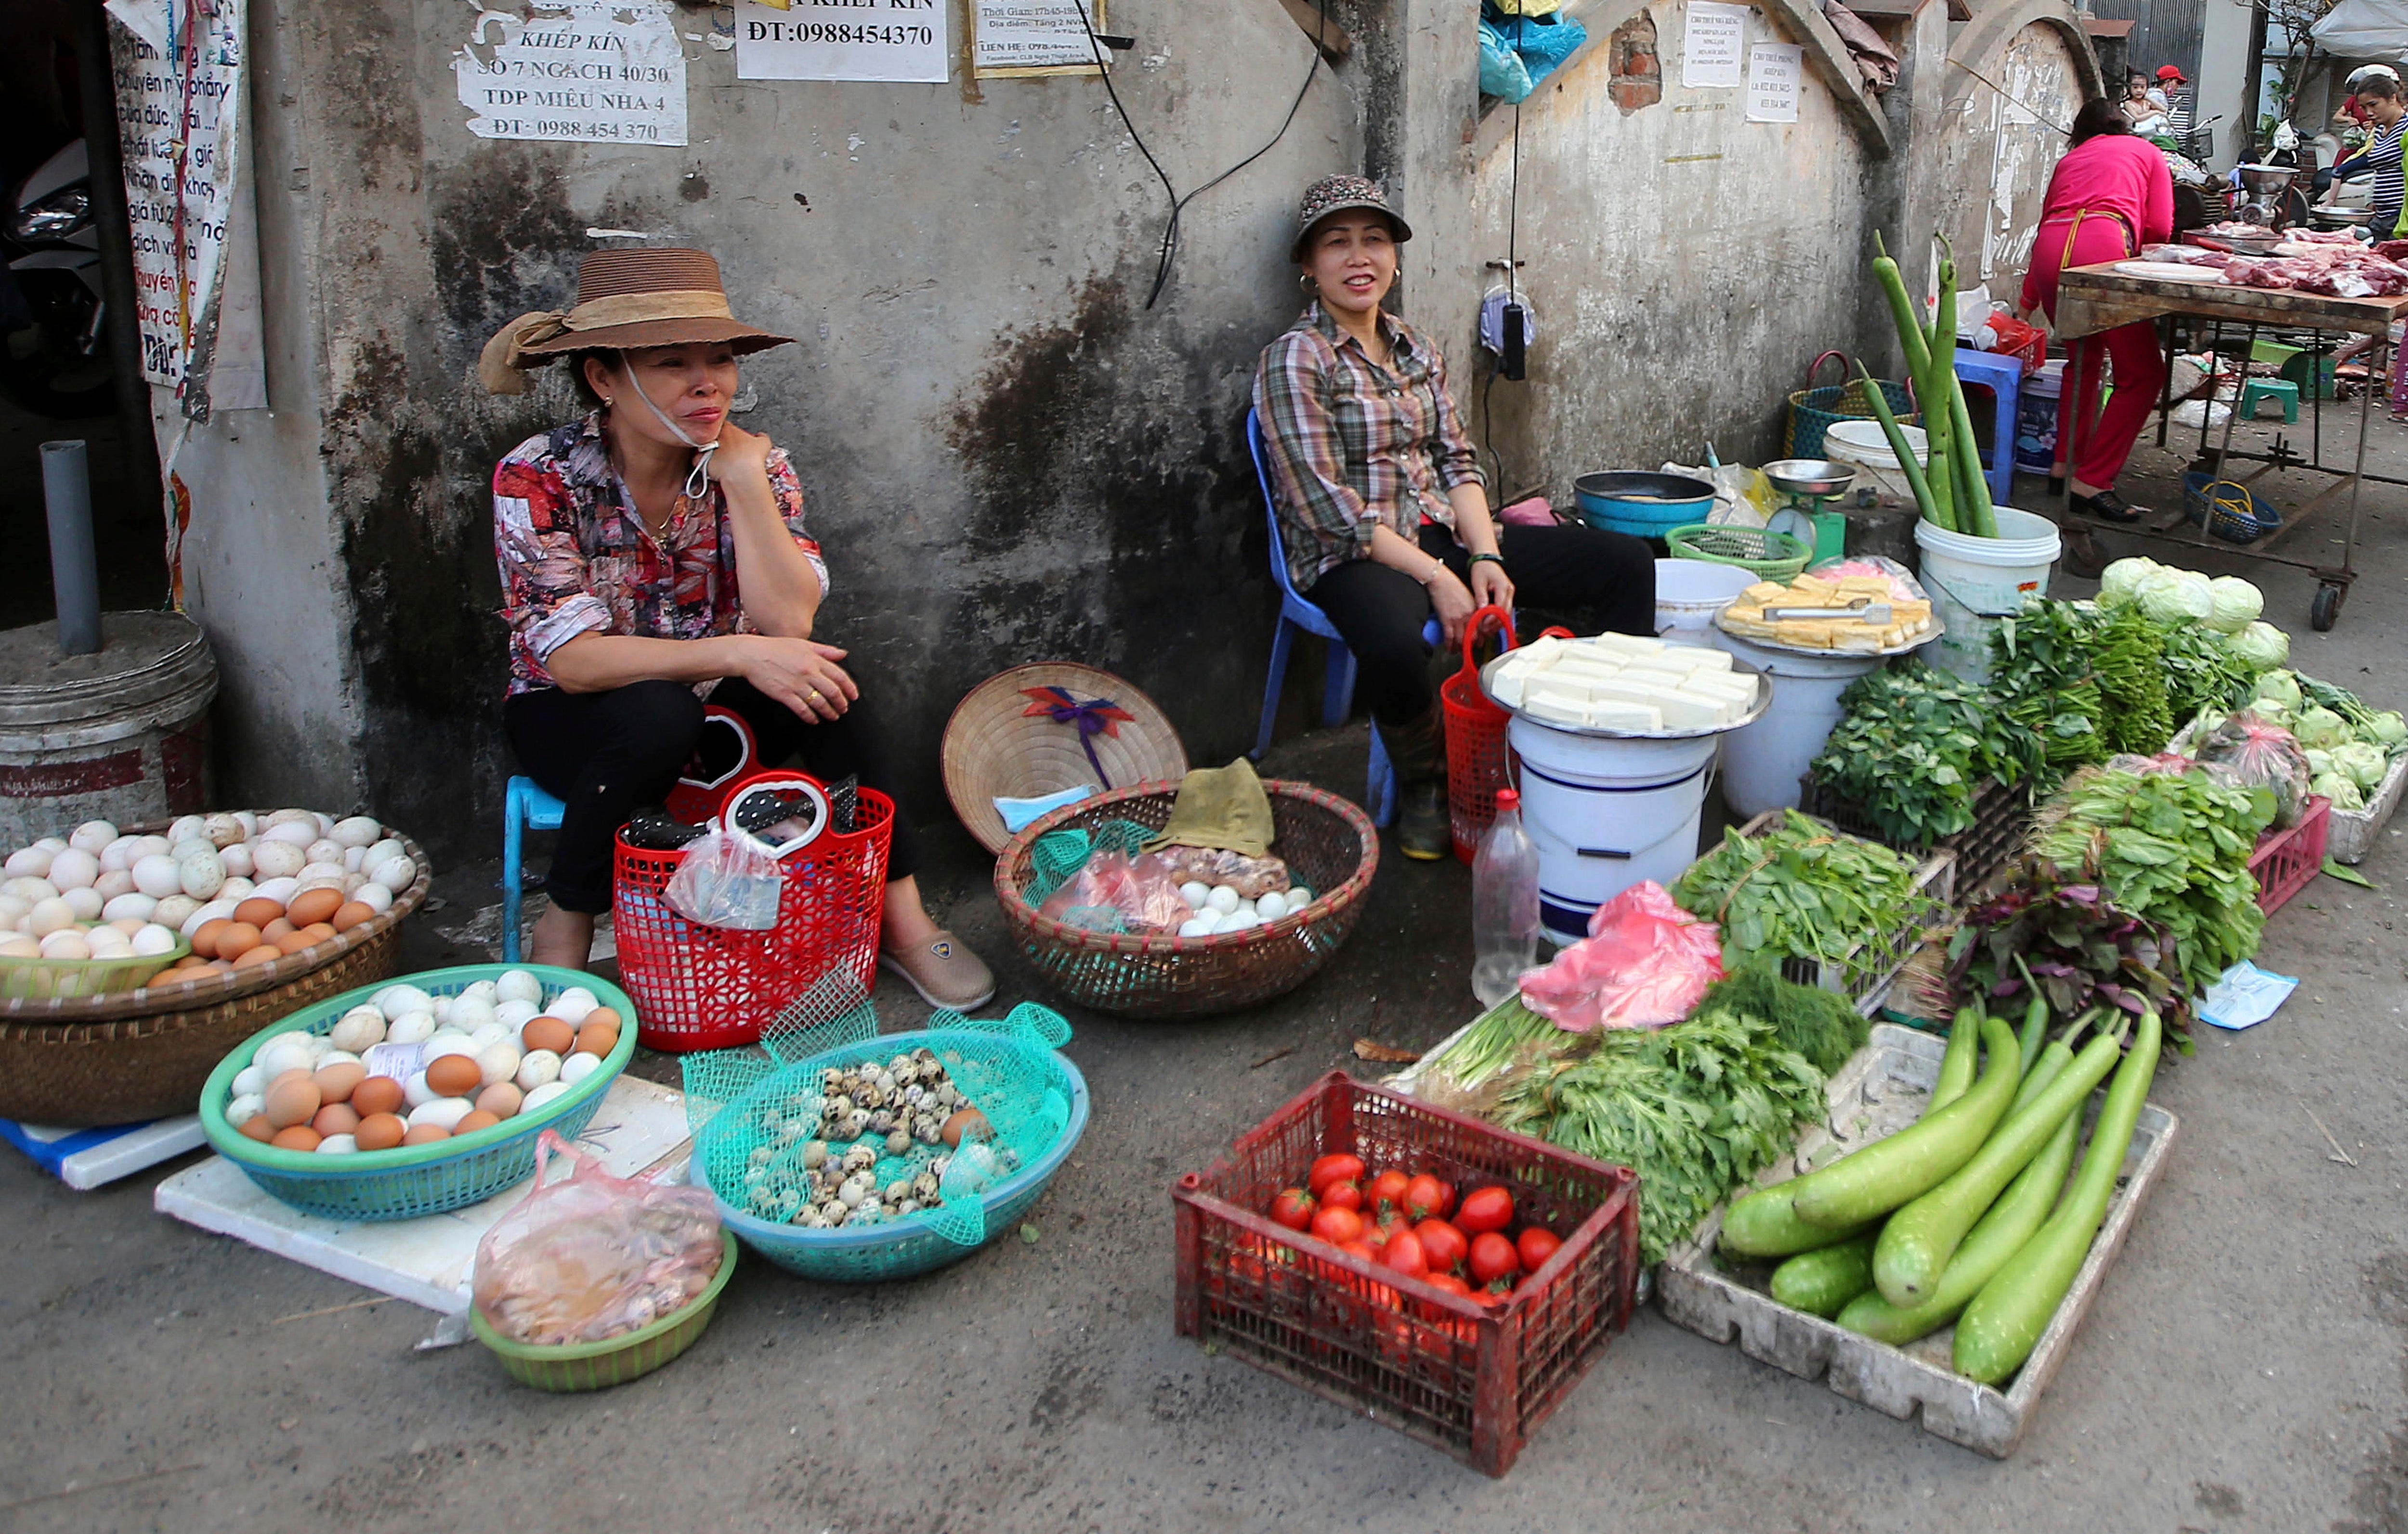 A woman sells vegetables at an outdoor market in Hanoi, Vietnam, Thursday, Feb. 21, 2019. Vietnam, the location of President Donald Trump's next meeting with North Korean leader Kim Jong Un, has come along way since the Us abandoned its war against communist North Vietnam in the 1970s. (AP Photo/Minh Hoang)